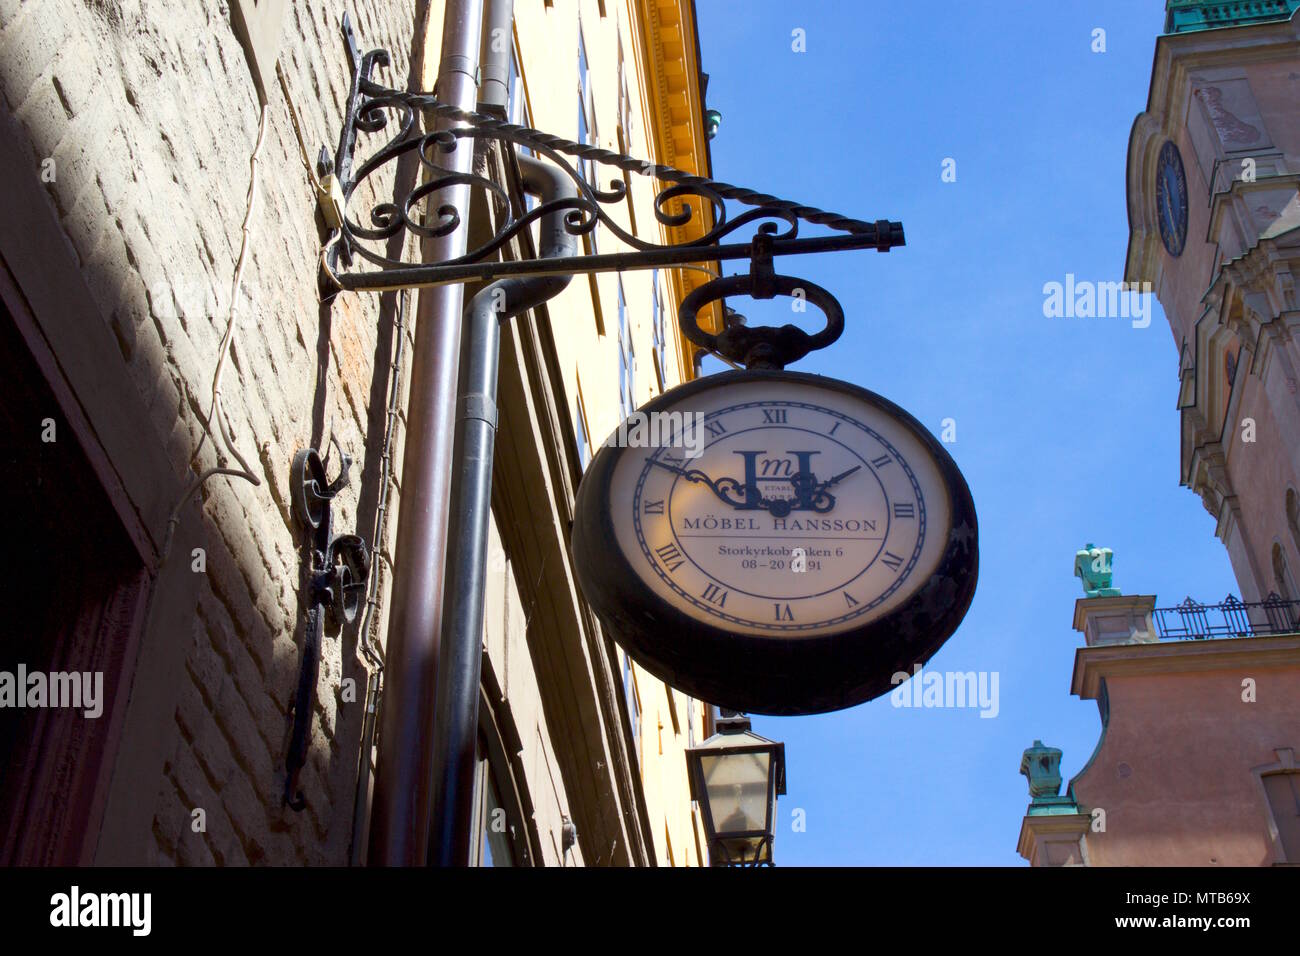 A clock used as a shop sign for Mobel Hansson, which is an antique shop on Storkyrkobrinken, Gamla Stan, Stockholm, Sweden Stock Photo